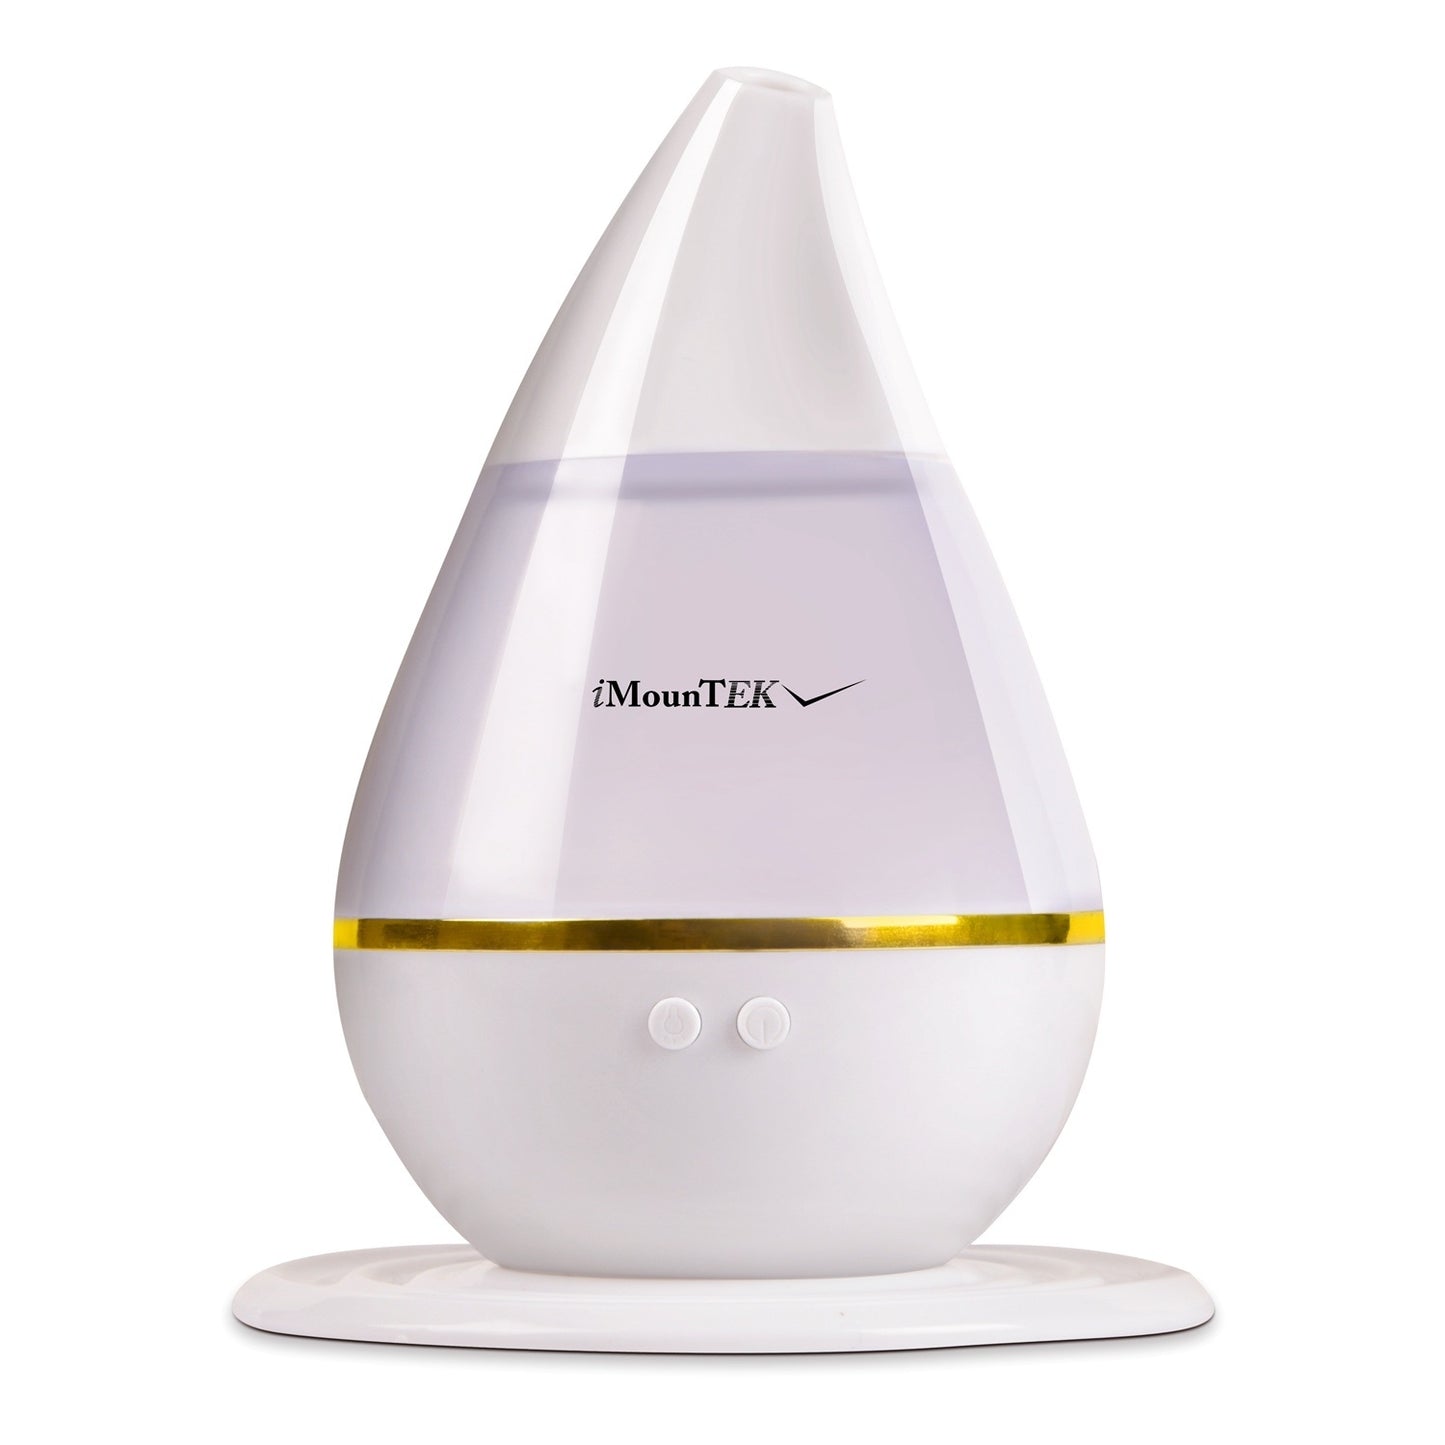 Ultrasonic Essential Oil Diffuser with 7 Color LED - 250 ml